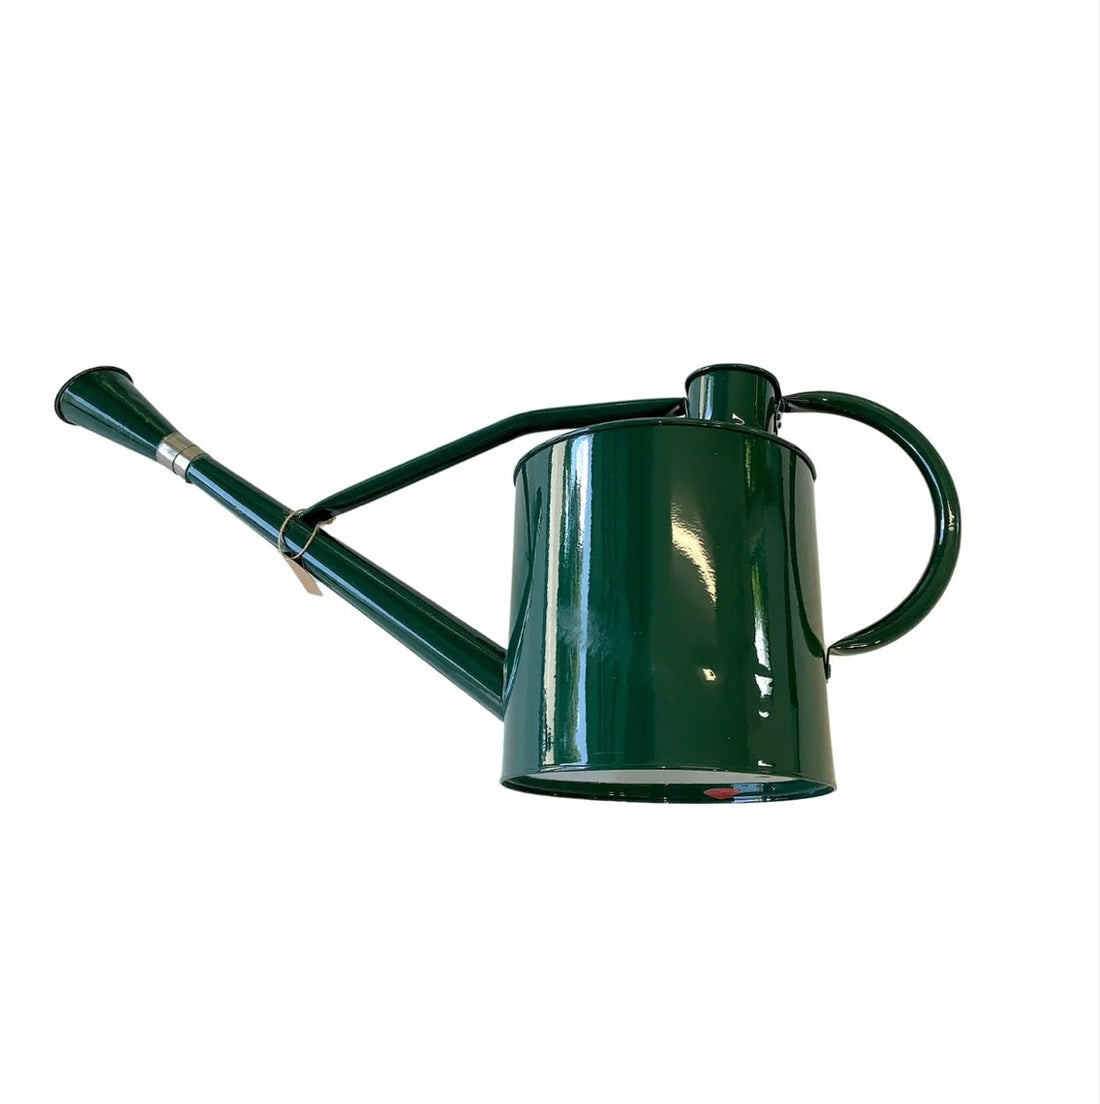 Omni Antique Watering Can - The Flower Crate